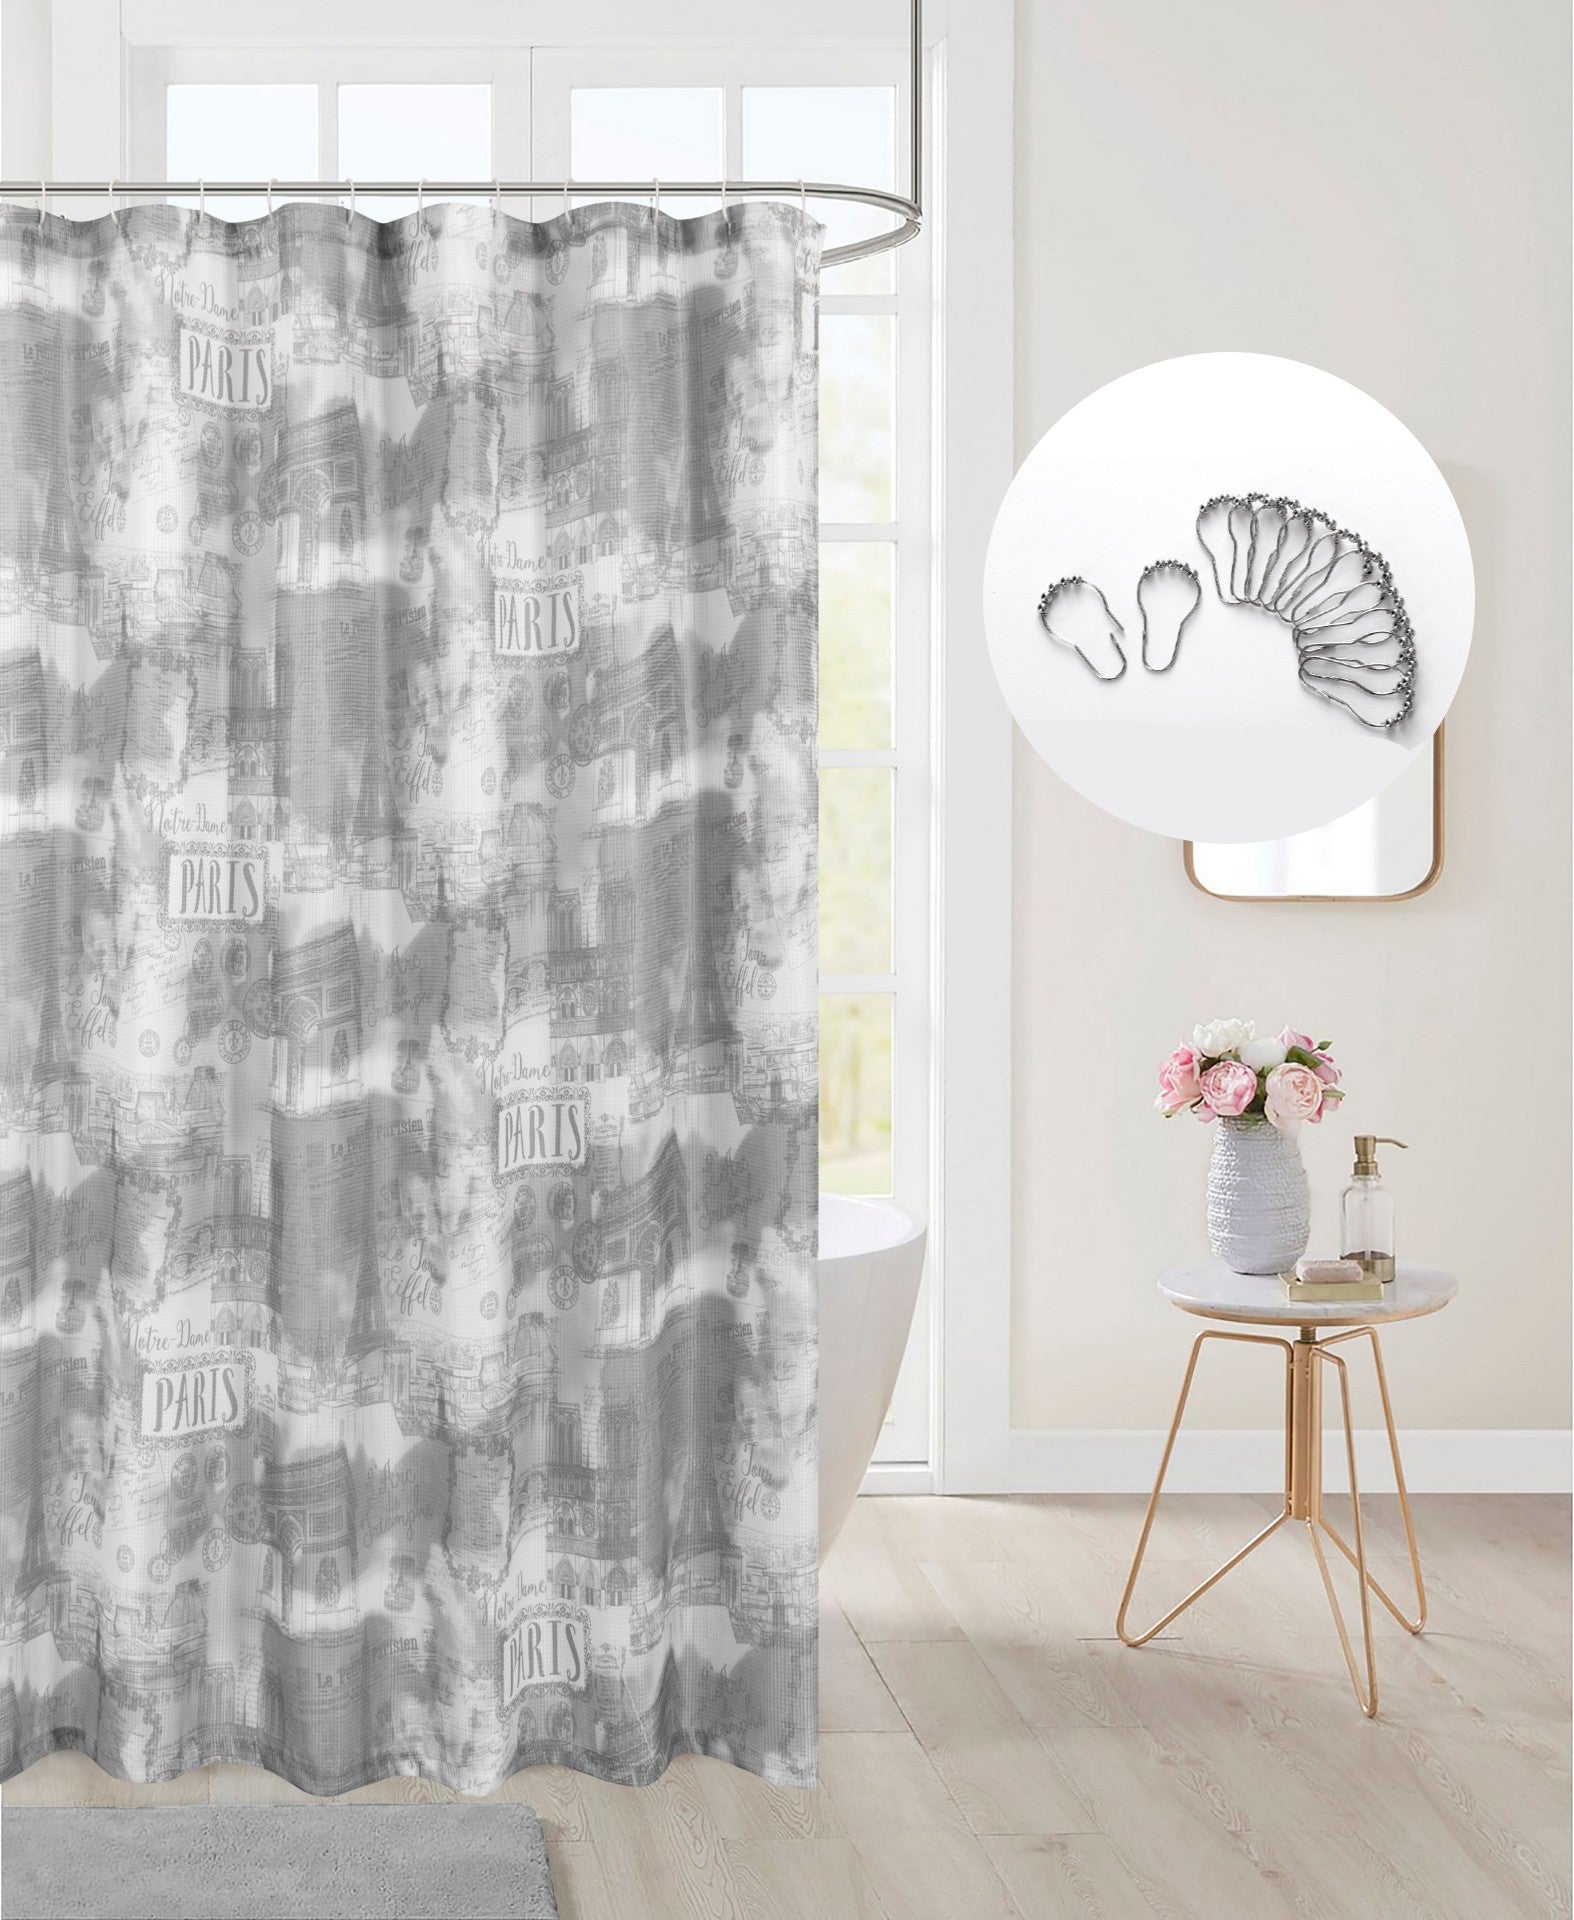 Dainty Home 13 Piece Paris Printed Waffle Weave Textured Shower Curtain And 12 Metal Rollerball Hooks